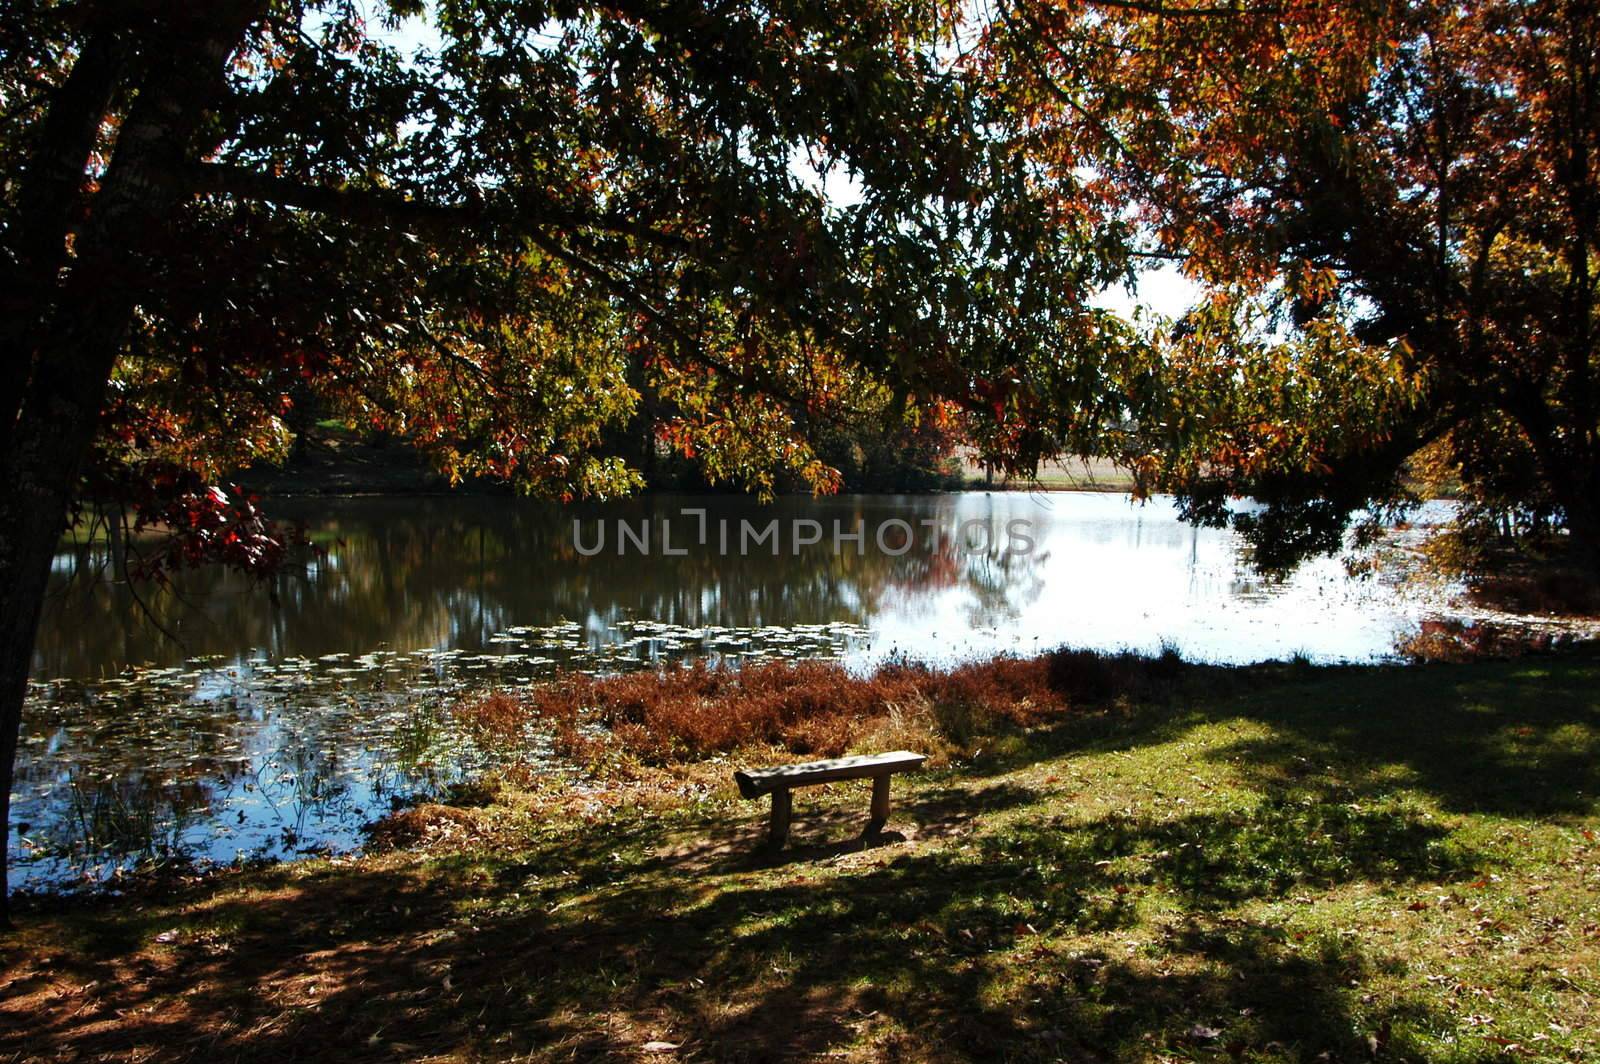 A park bench scene during the fall of the year along the lake